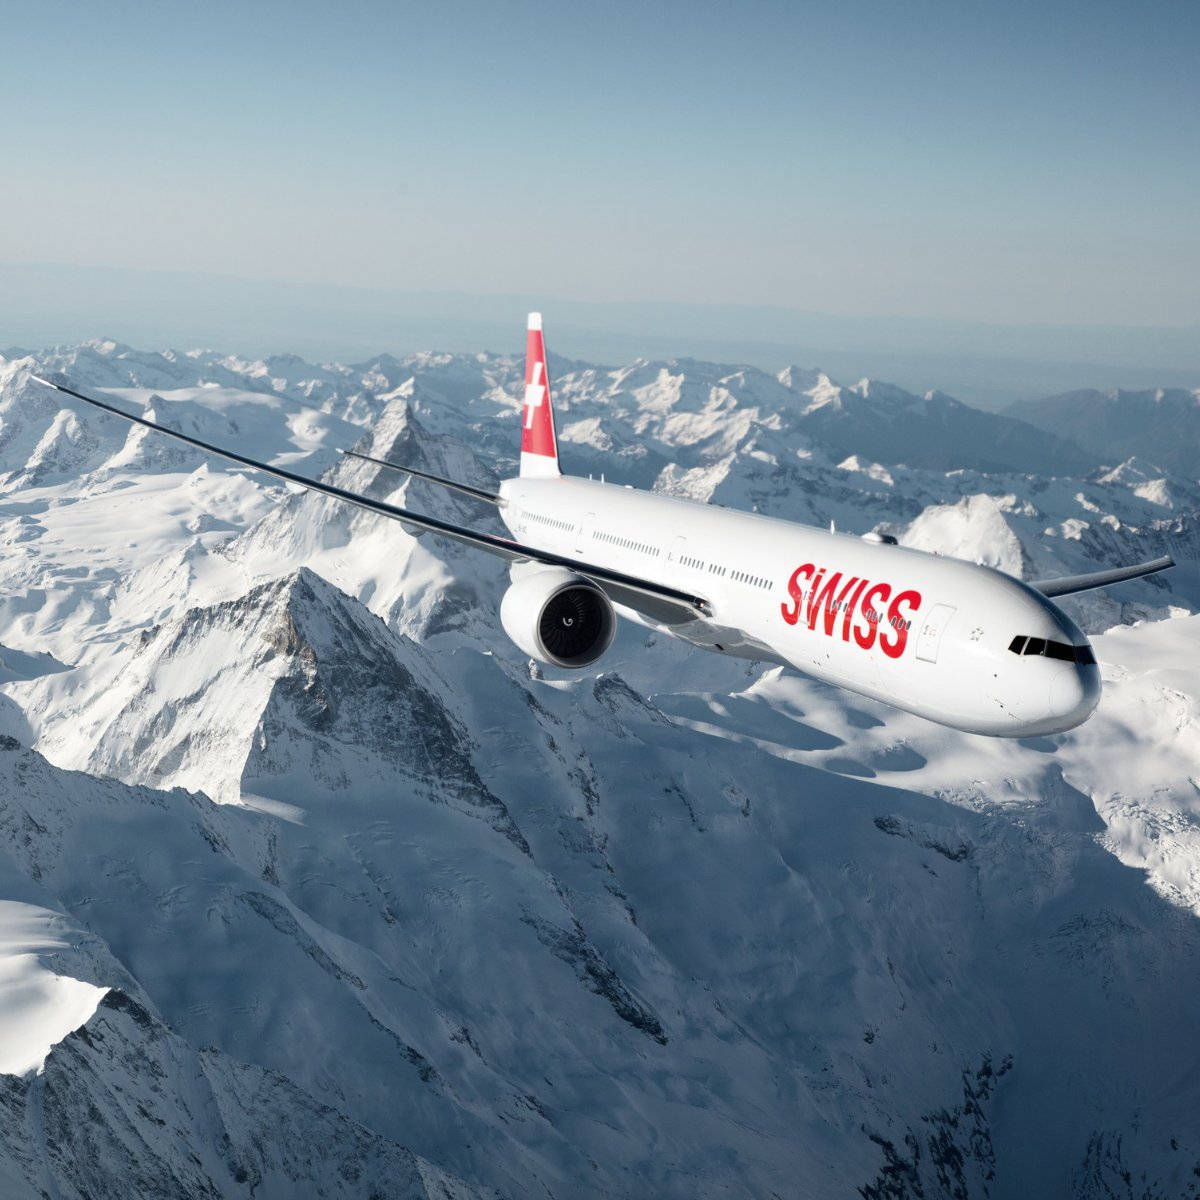 Swiss Airlines Over The Mountain Range Wallpaper